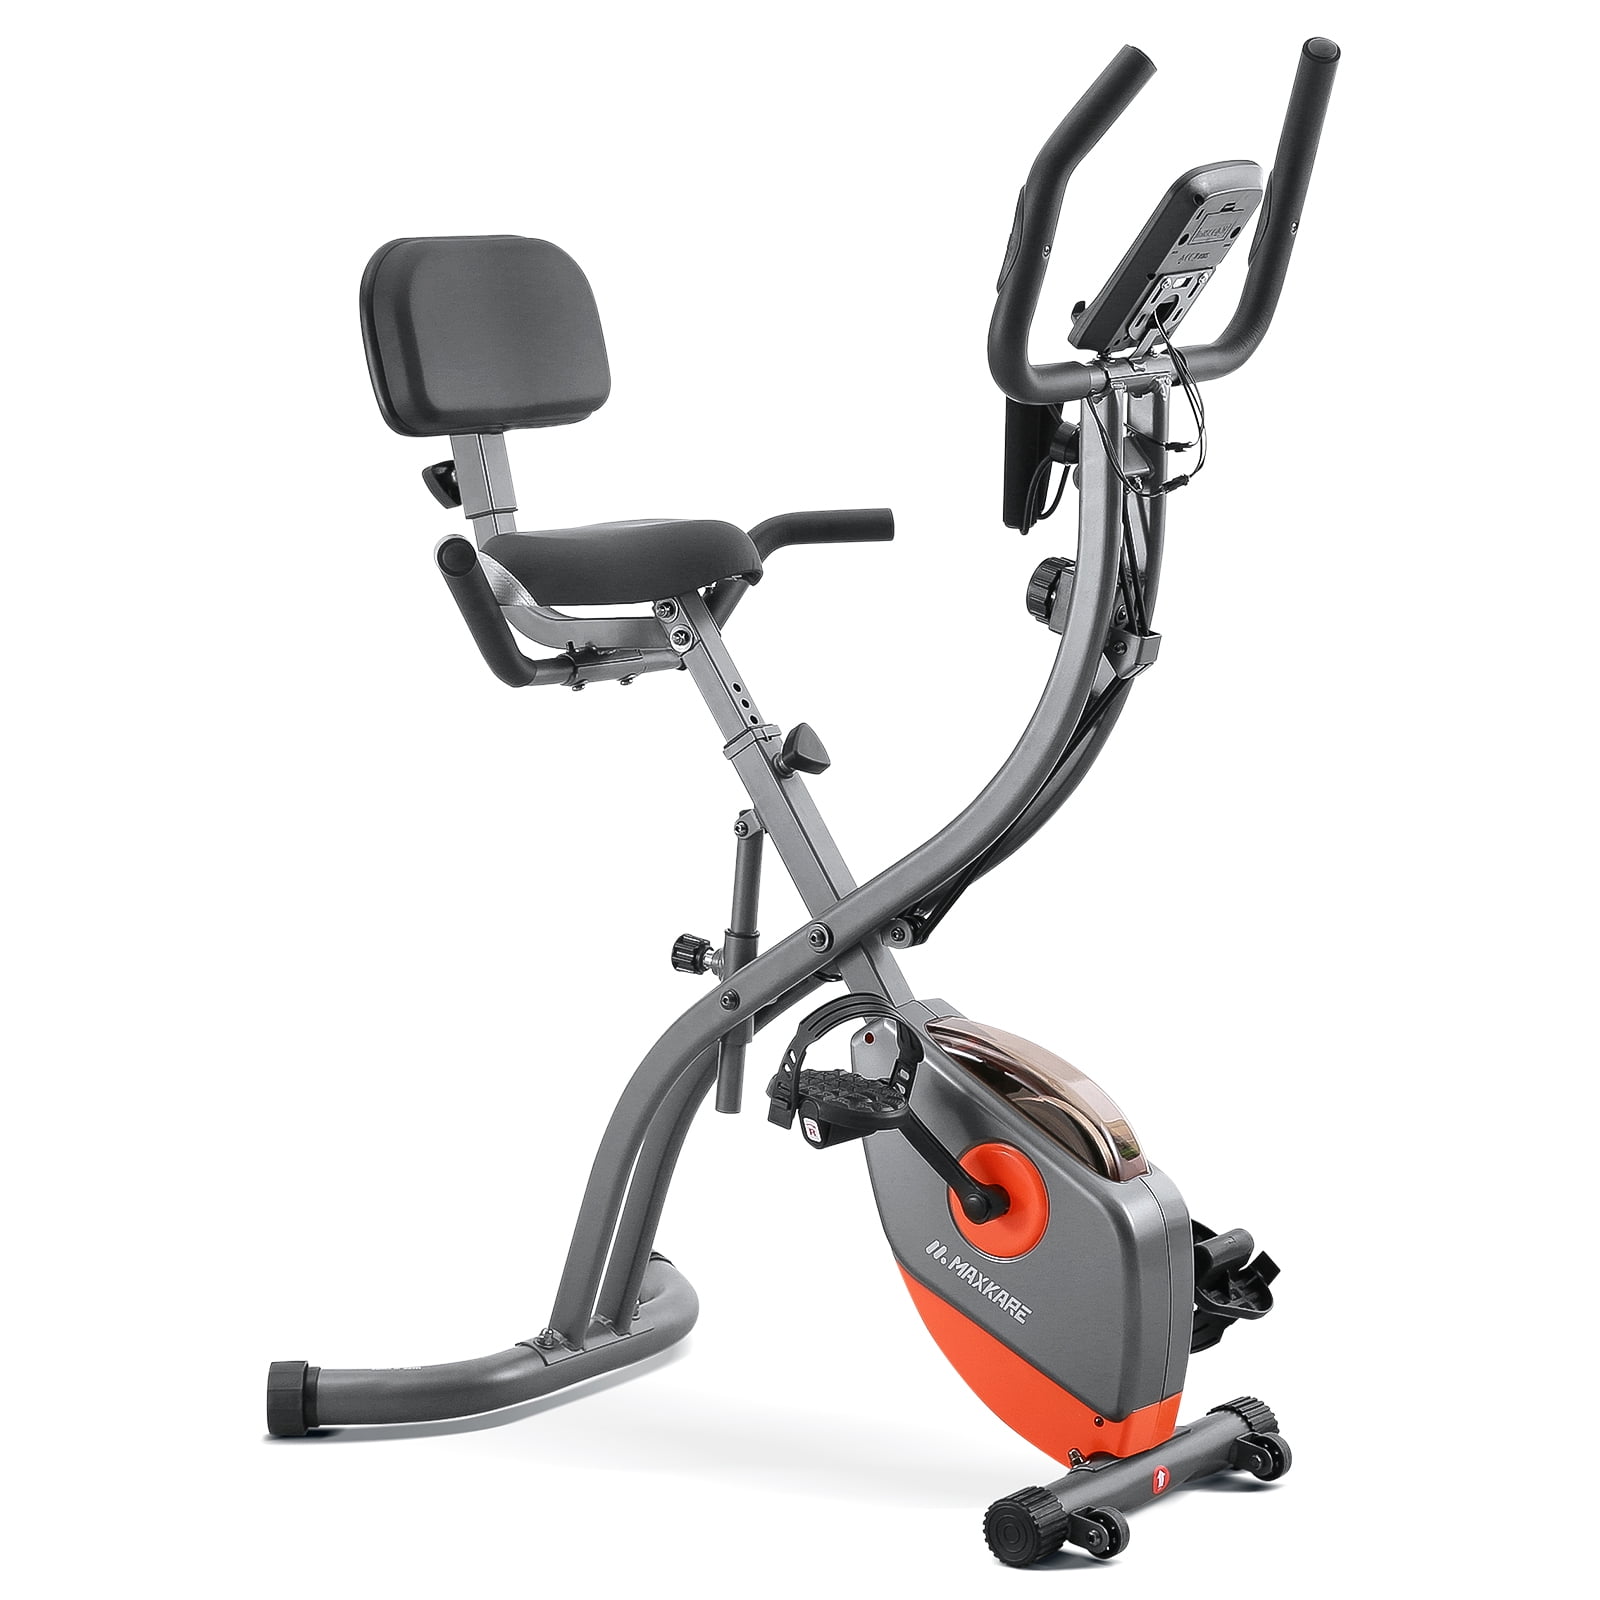 Details about   Indoor Exercise Bike Stationary Cycling Bicycle Cardio Fitness Workout 